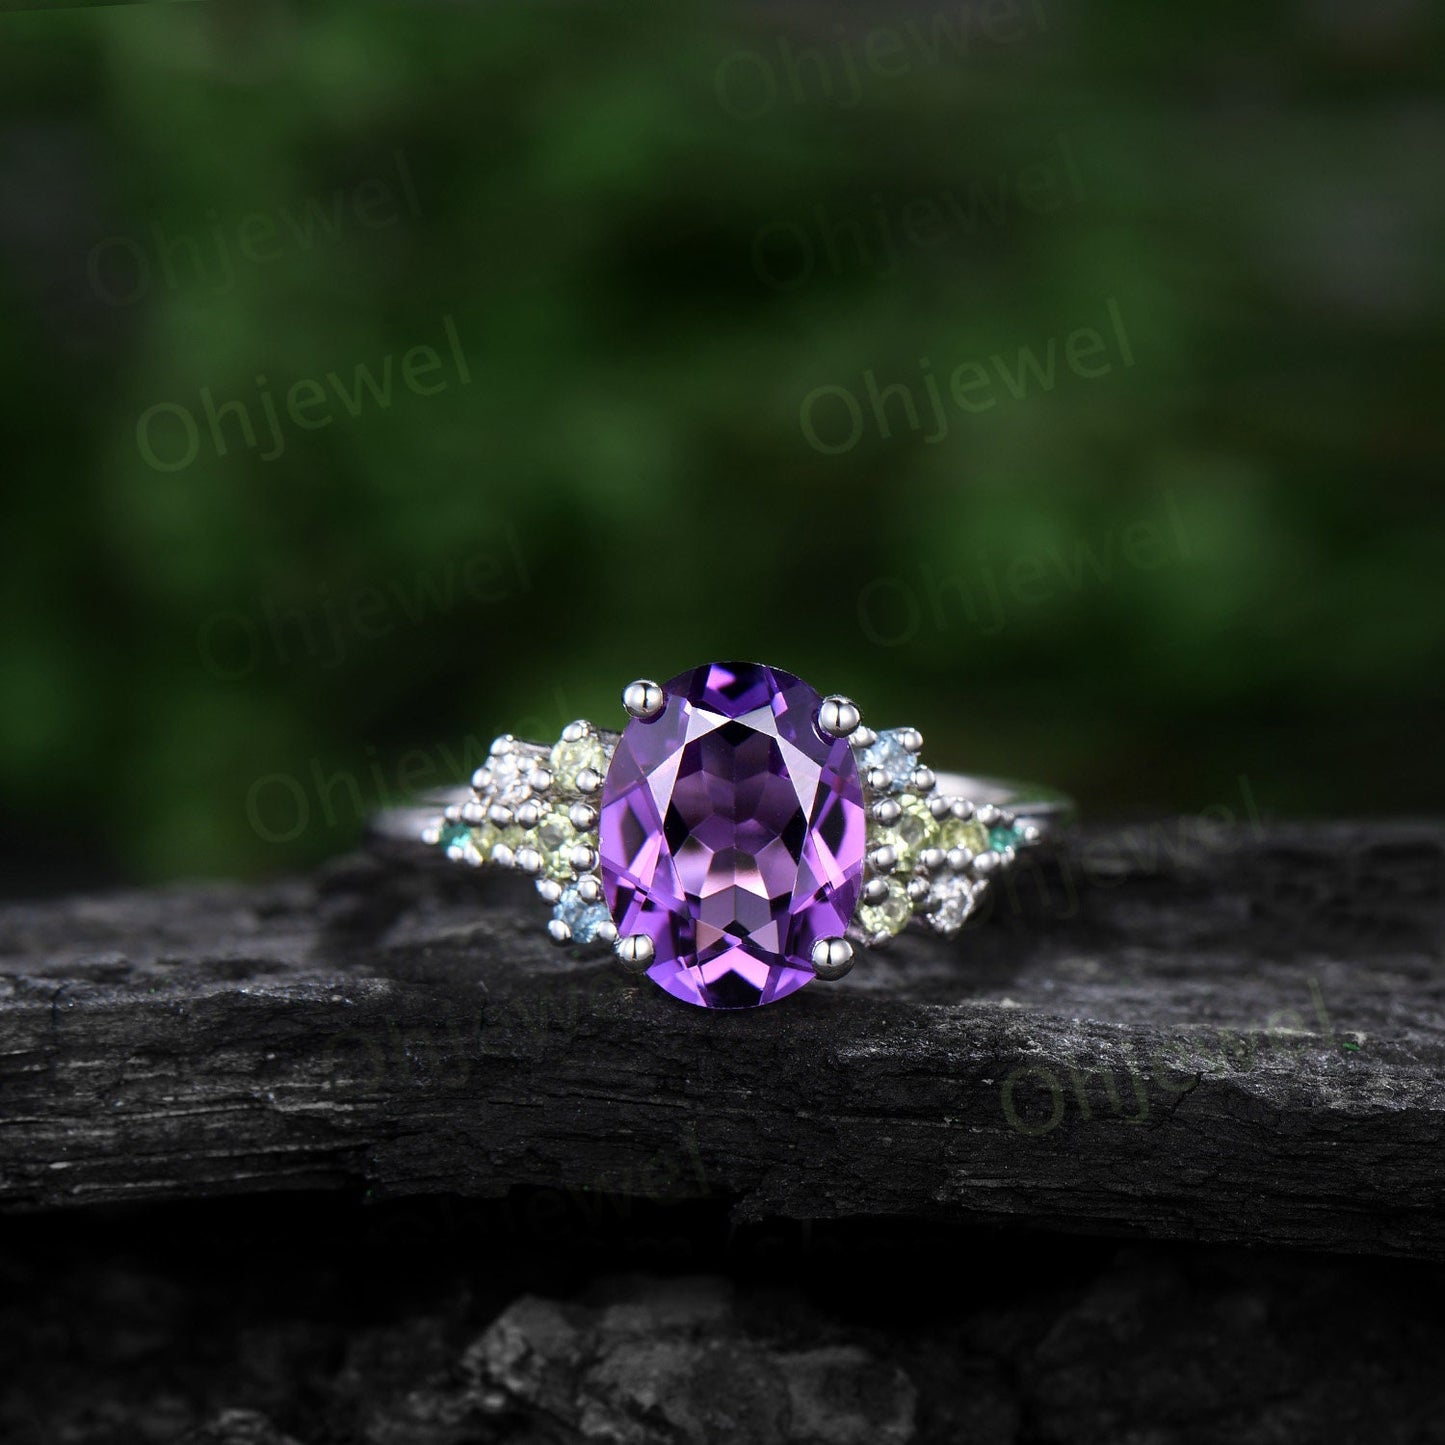 Oval cut purple amethyst ring vintage cluster snowdrift emerald peridot topaz ring white gold unique engagement ring women anniversary gift